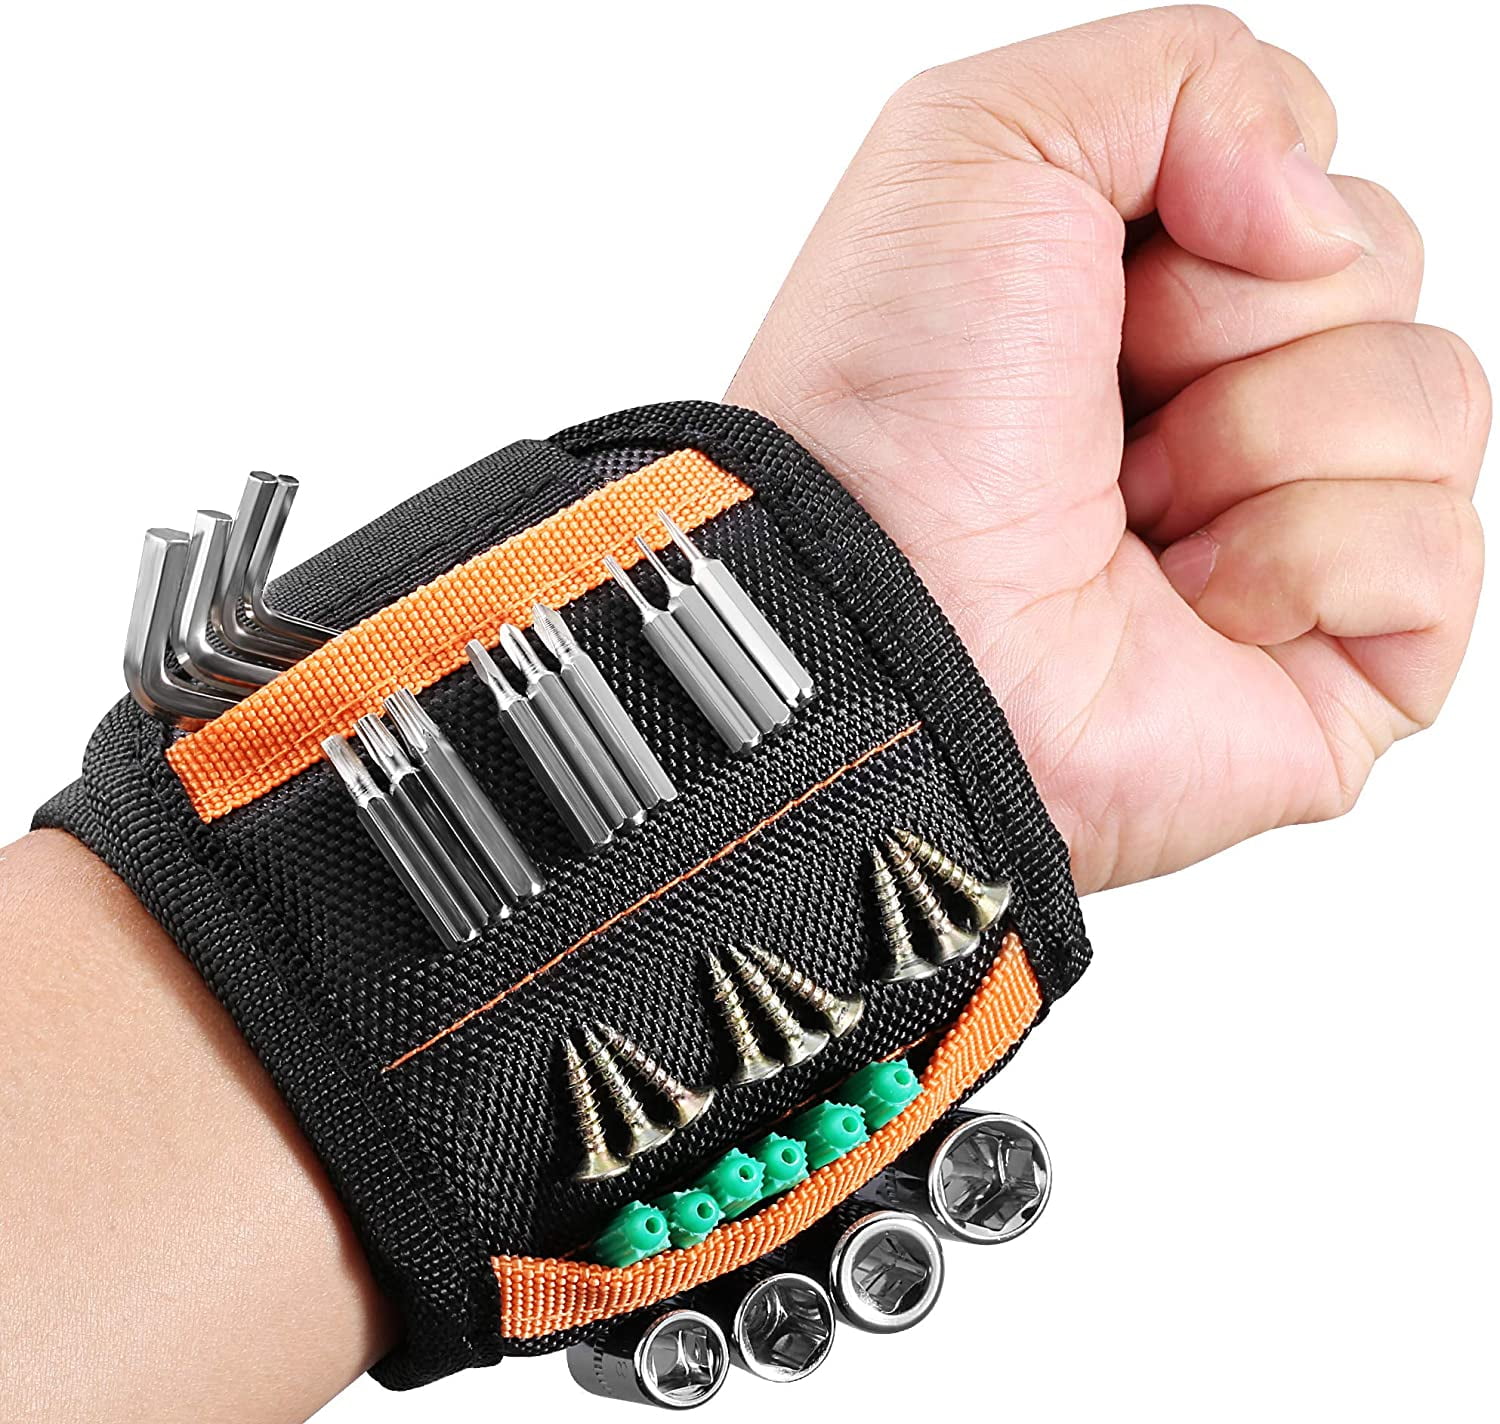 Magnetic Wristband with Flashlight & Magnet Pedal for Holding Screws,  Magnetic Wristband Tool Belt for Holding Screws Nails Drill Bits, Cool Handy  Gadget Gifts for Fathers, Husband Who Have Everything 